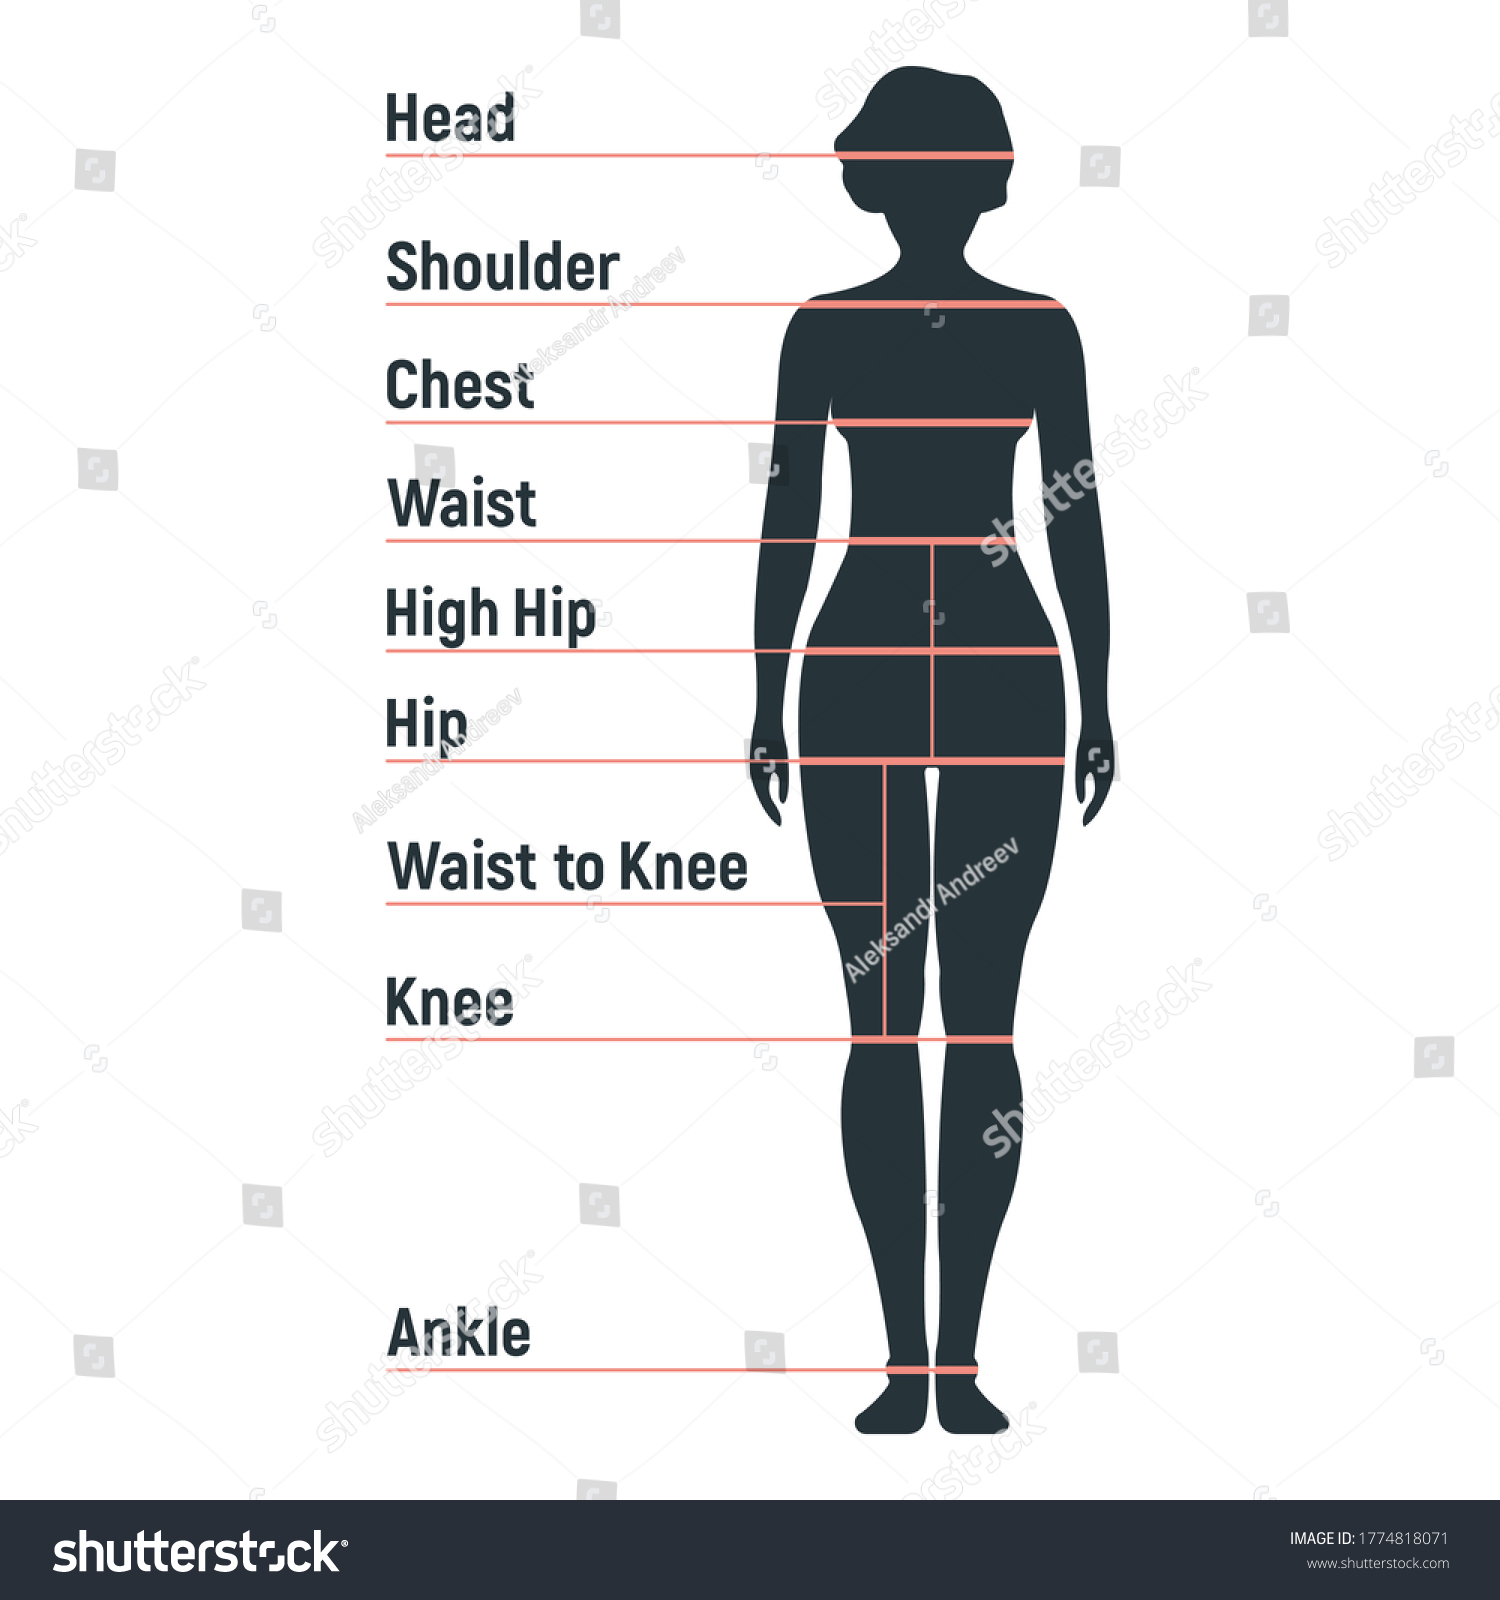 Female Size Chart Anatomy Human Character Stock Vector (Royalty Free ...